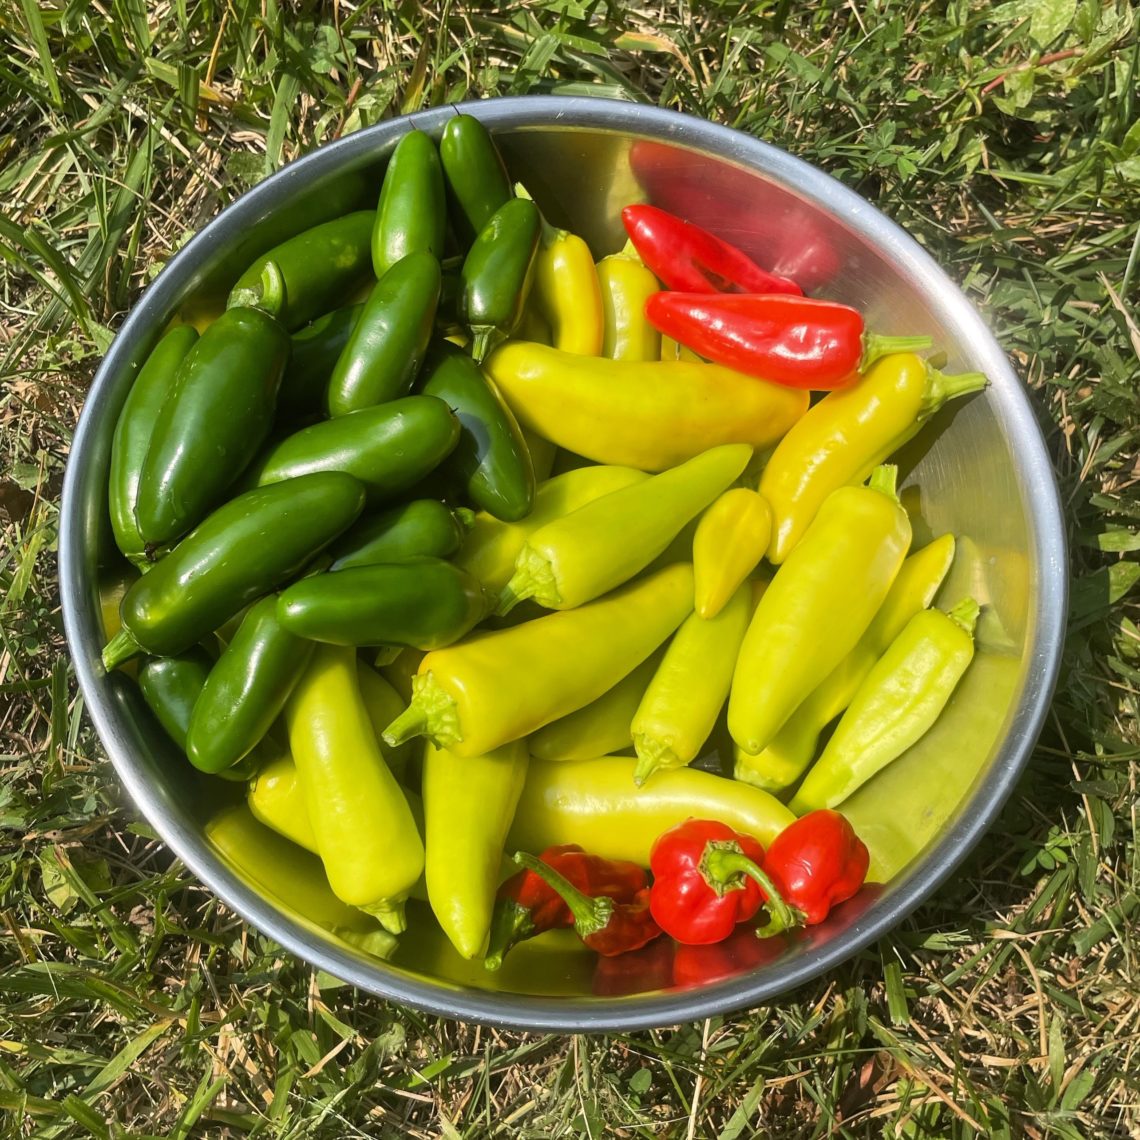 Metal bowl containing red, green, and yellow hot peppers, sitting on grass